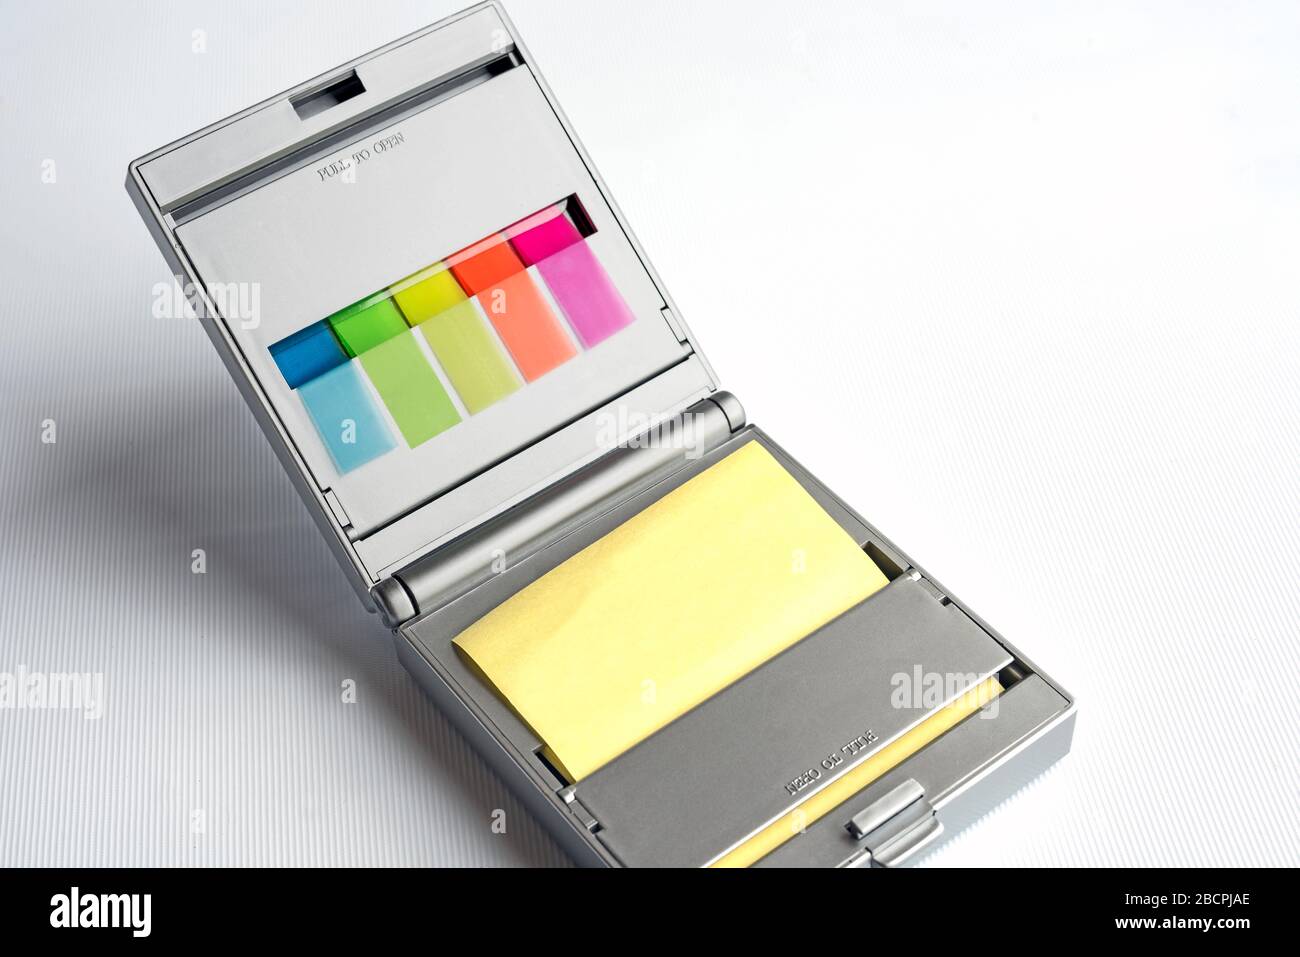 Silver dispenser of yellow postit notes and multi coloured sticky index highlighters against a white background Stock Photo